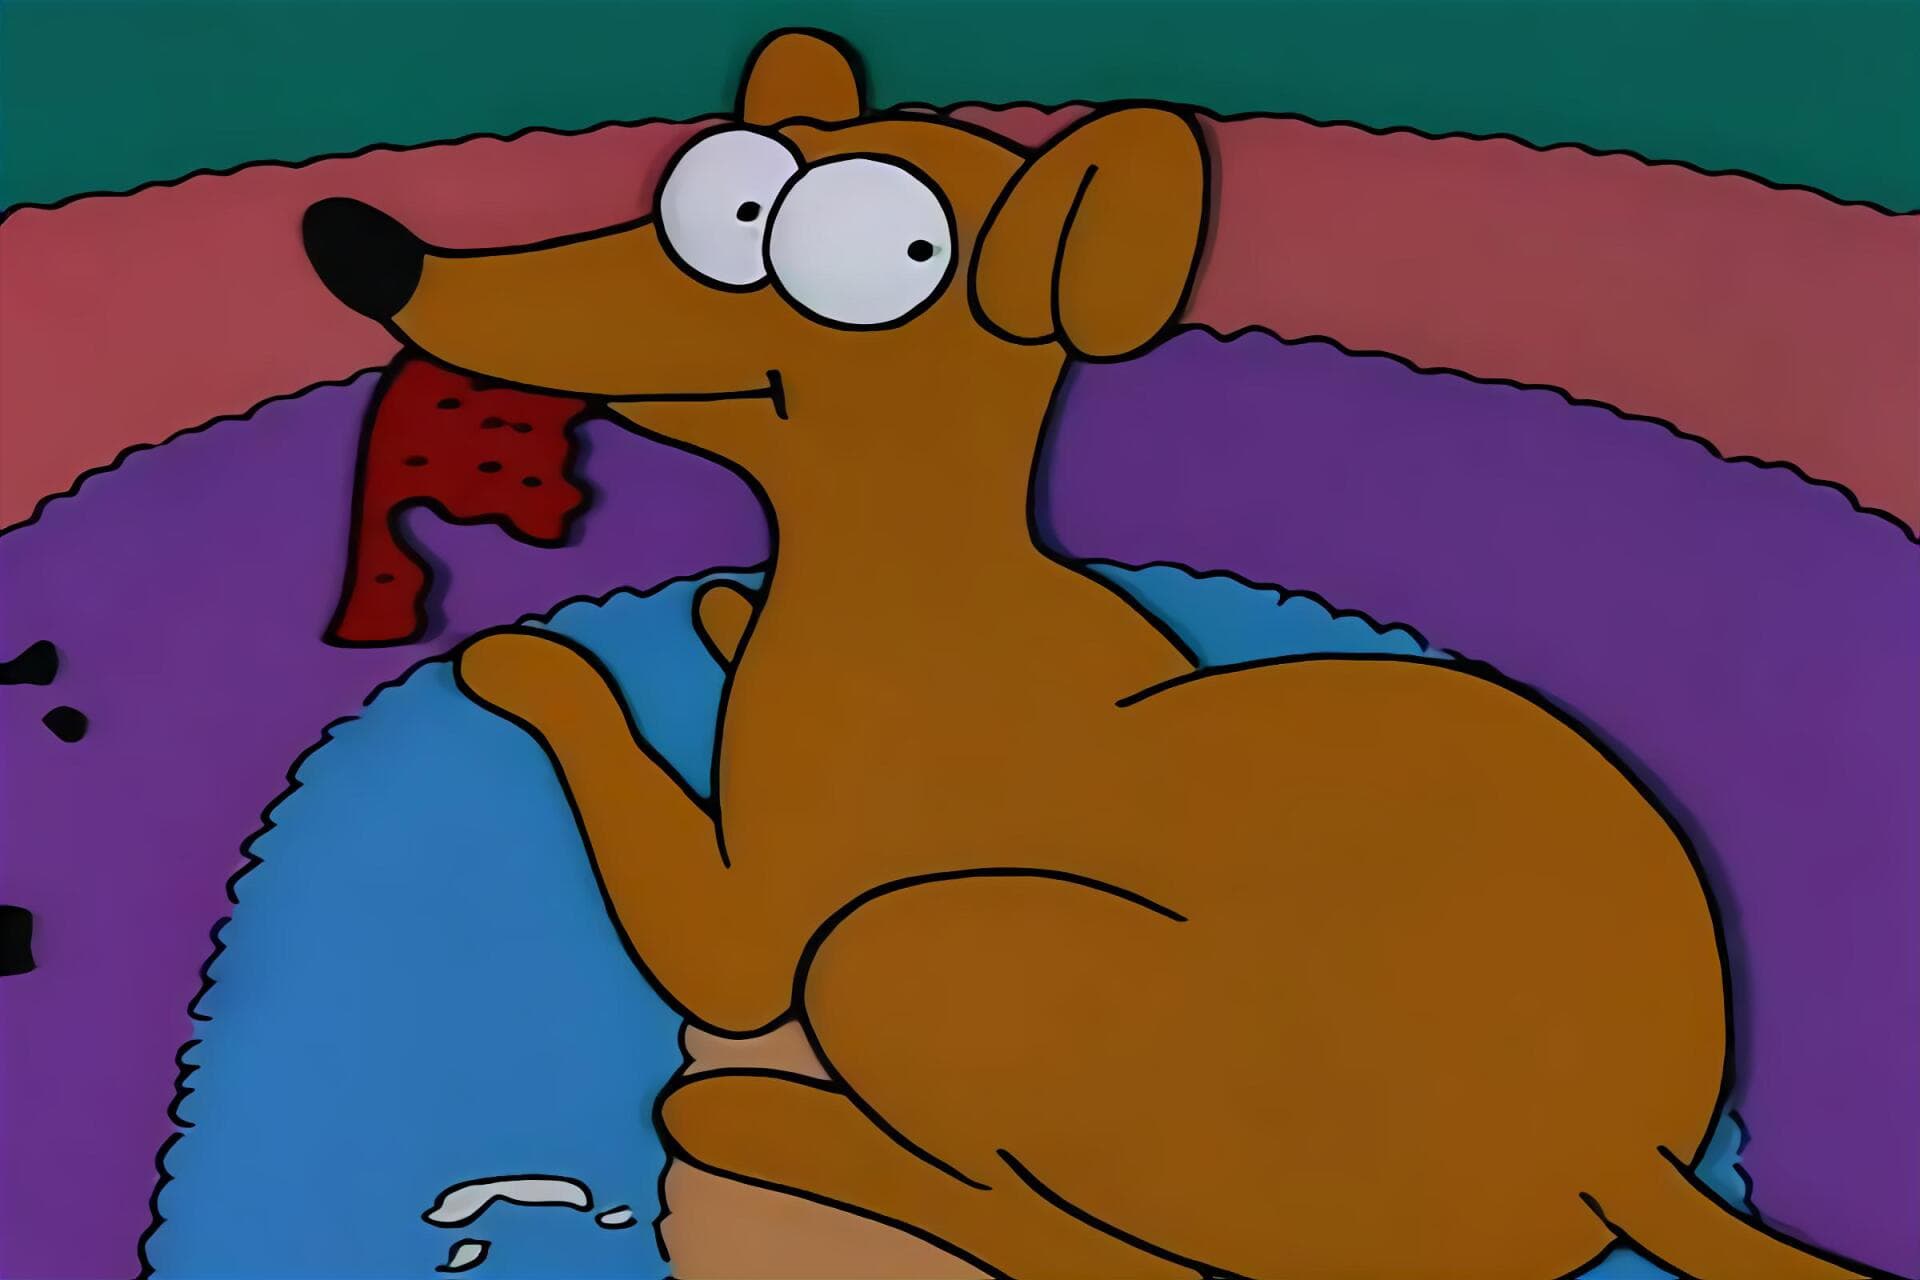 The Simpsons - Bart's Dog Gets an F